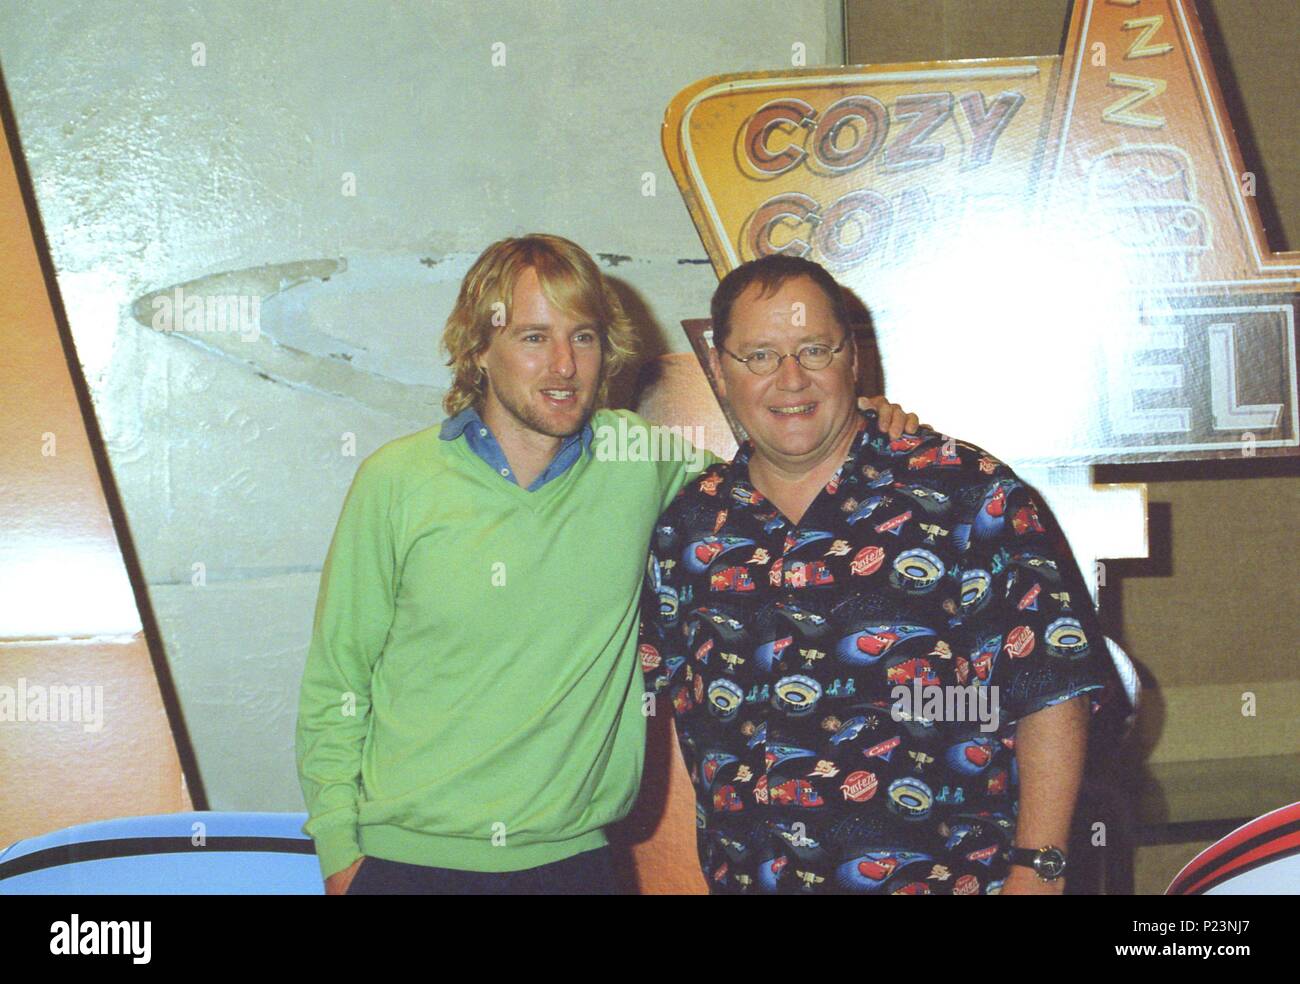 19 / 05 / 2006; Barcelona, Spain. Director JOHN LASSETER and actor OWEN WILSON (Lightning McQueen's Voice) at the 'Cars' European Premiere, the last Disney / Pixar production, held at Hotel Arts. Stock Photo